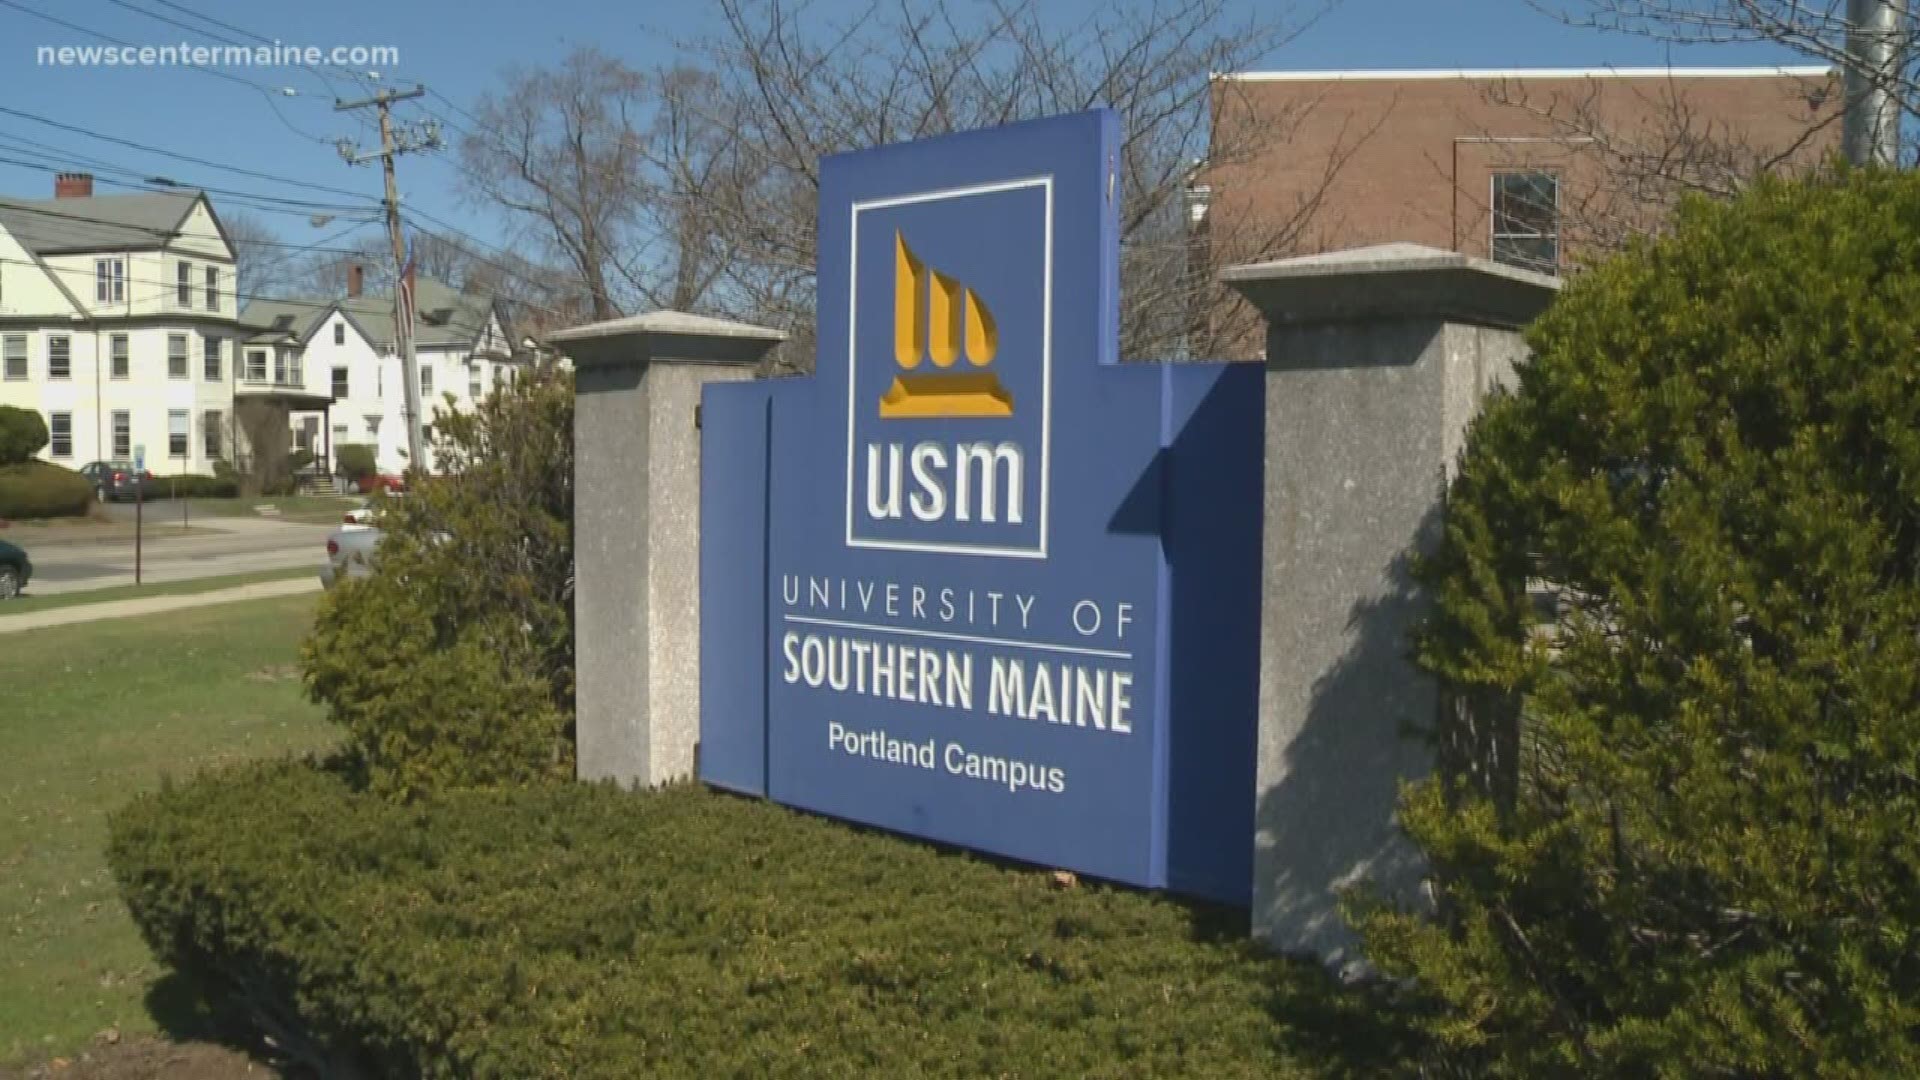 Students at USM will not have access to the Woodbury Campus for a while because crews are working to repair damage caused by a burst pipe.